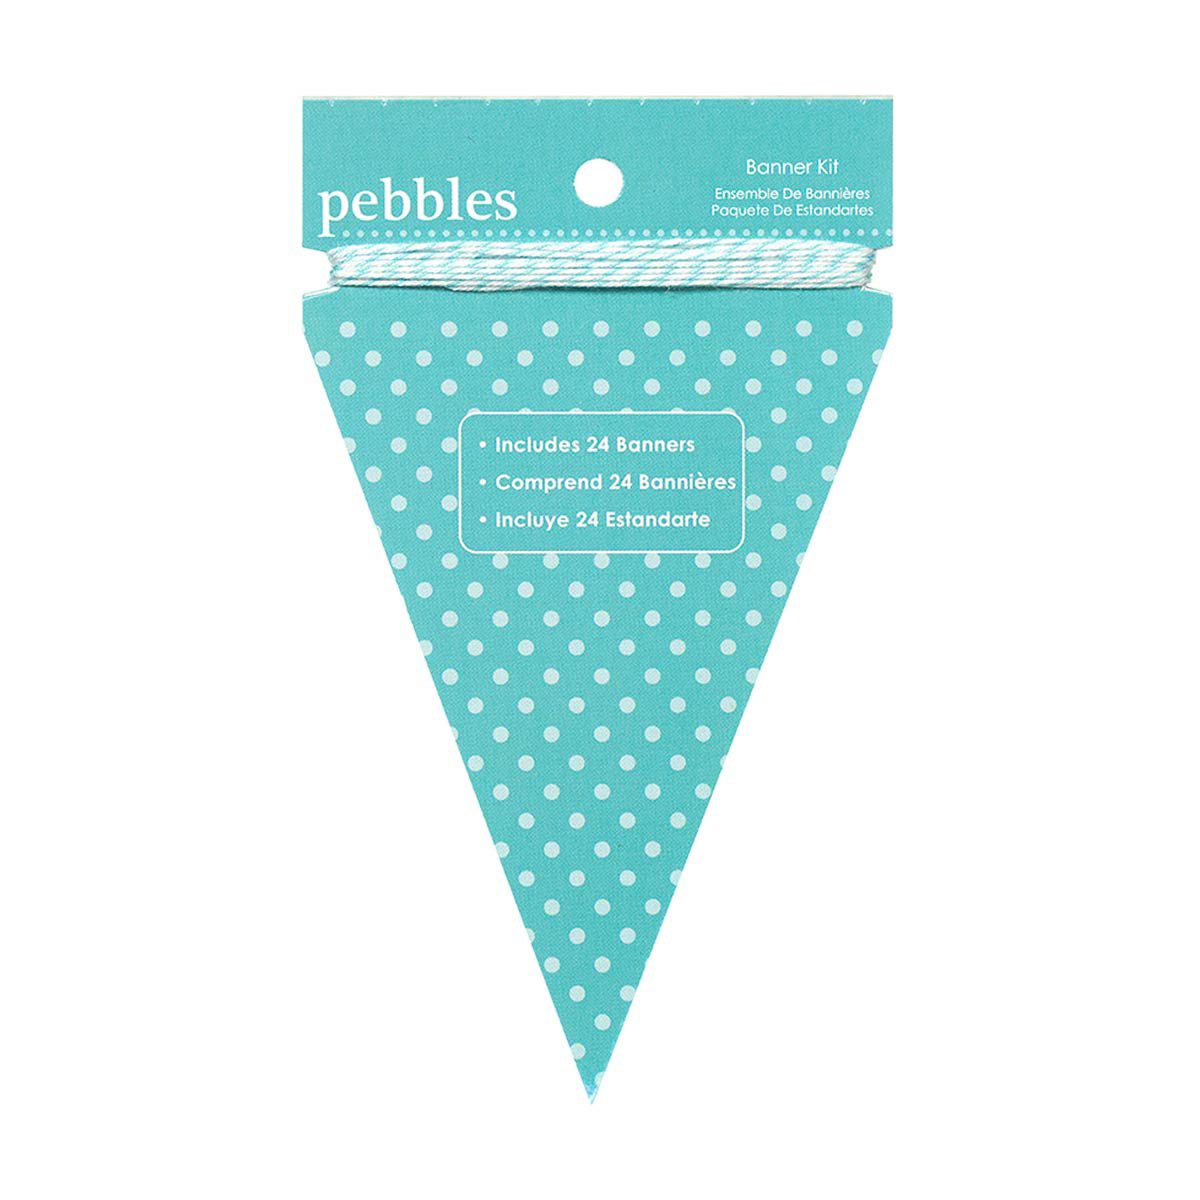 American Crafts Pebbles Banner Kit, Assorted